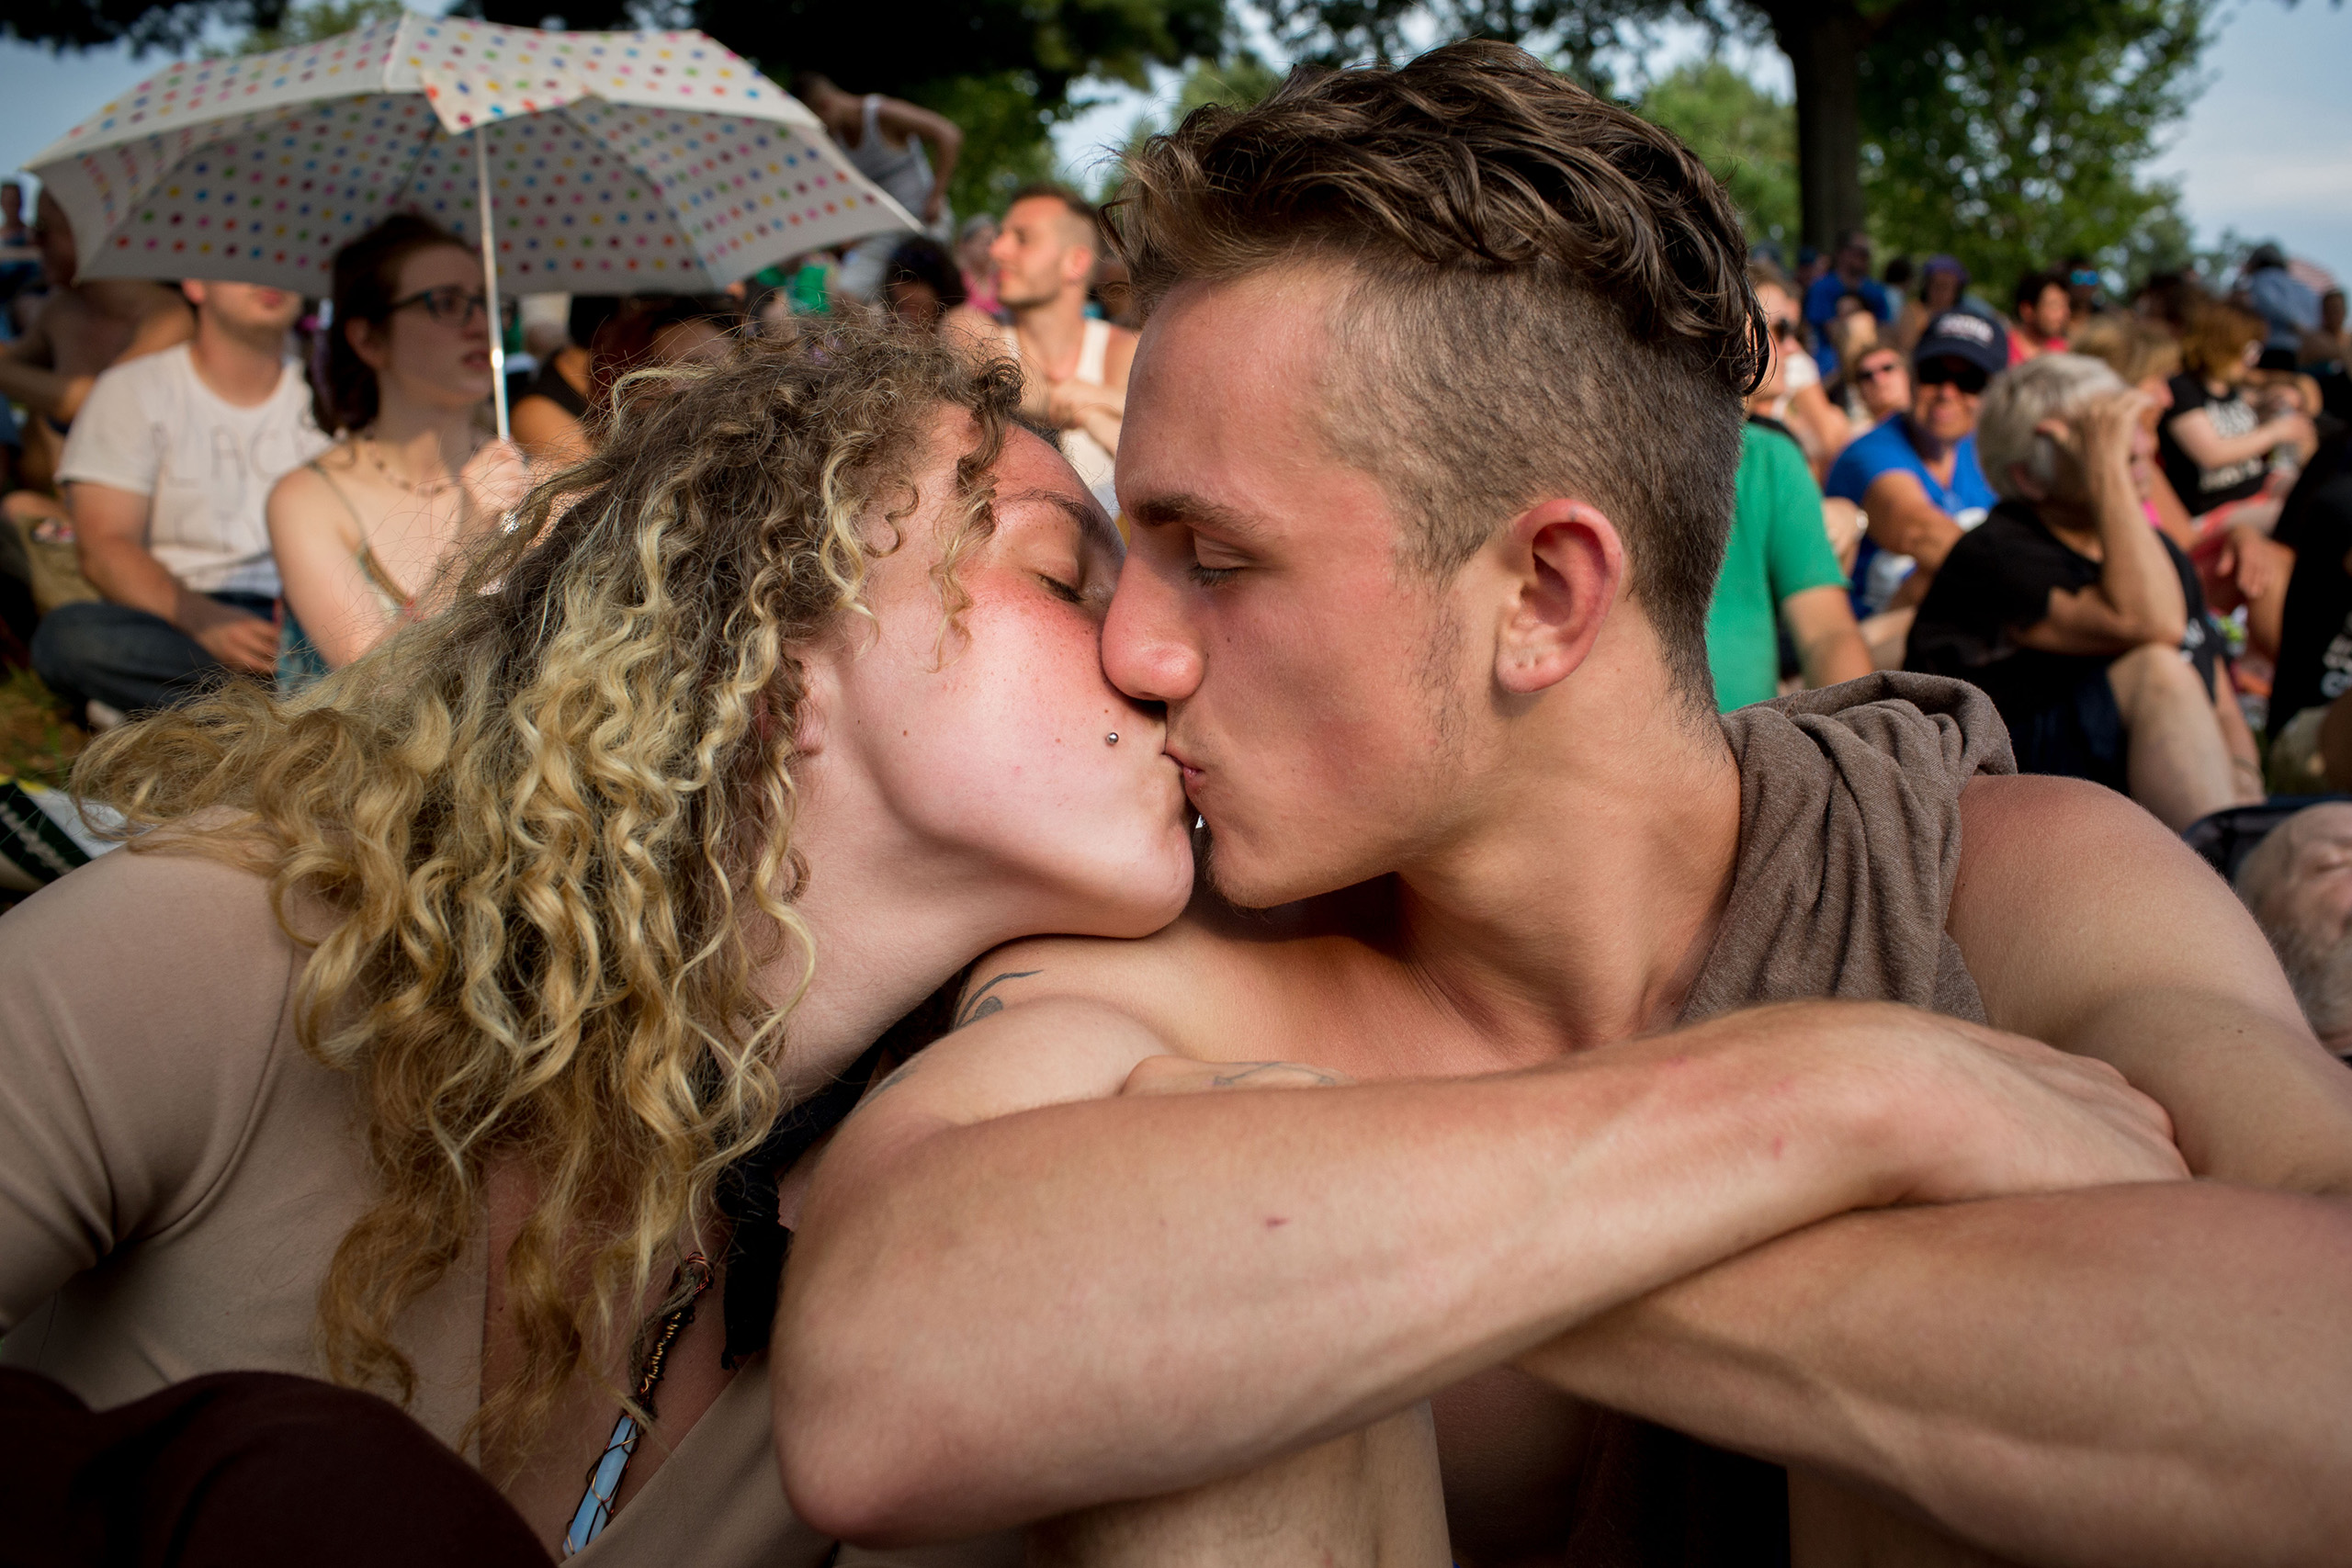 Deirdre Hilla and Jake Rubin kiss at the protest park. Protesters convened at Franklin Roosevelt Park outside the Democratic National Convention at the Wells Fargo Center on July 25, 2016 in Philadelphia, PA. At a tent pitched in the park, they were addressed by many speakers including Green Party Candidate Jill Stein.